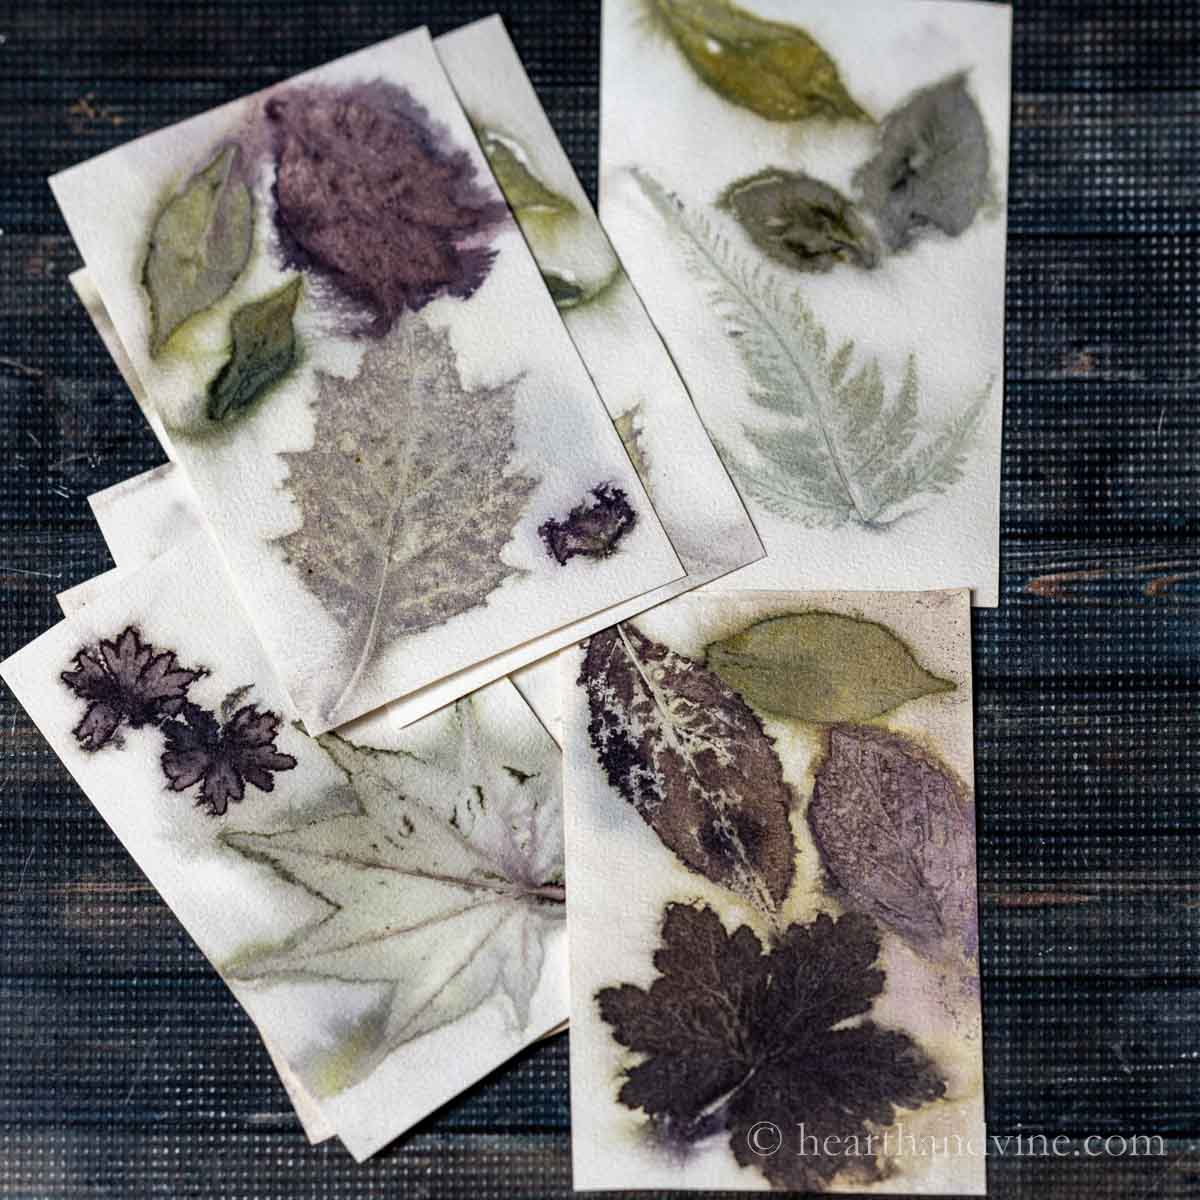 Cards with eco printing of various leaves in shades of green and purple.